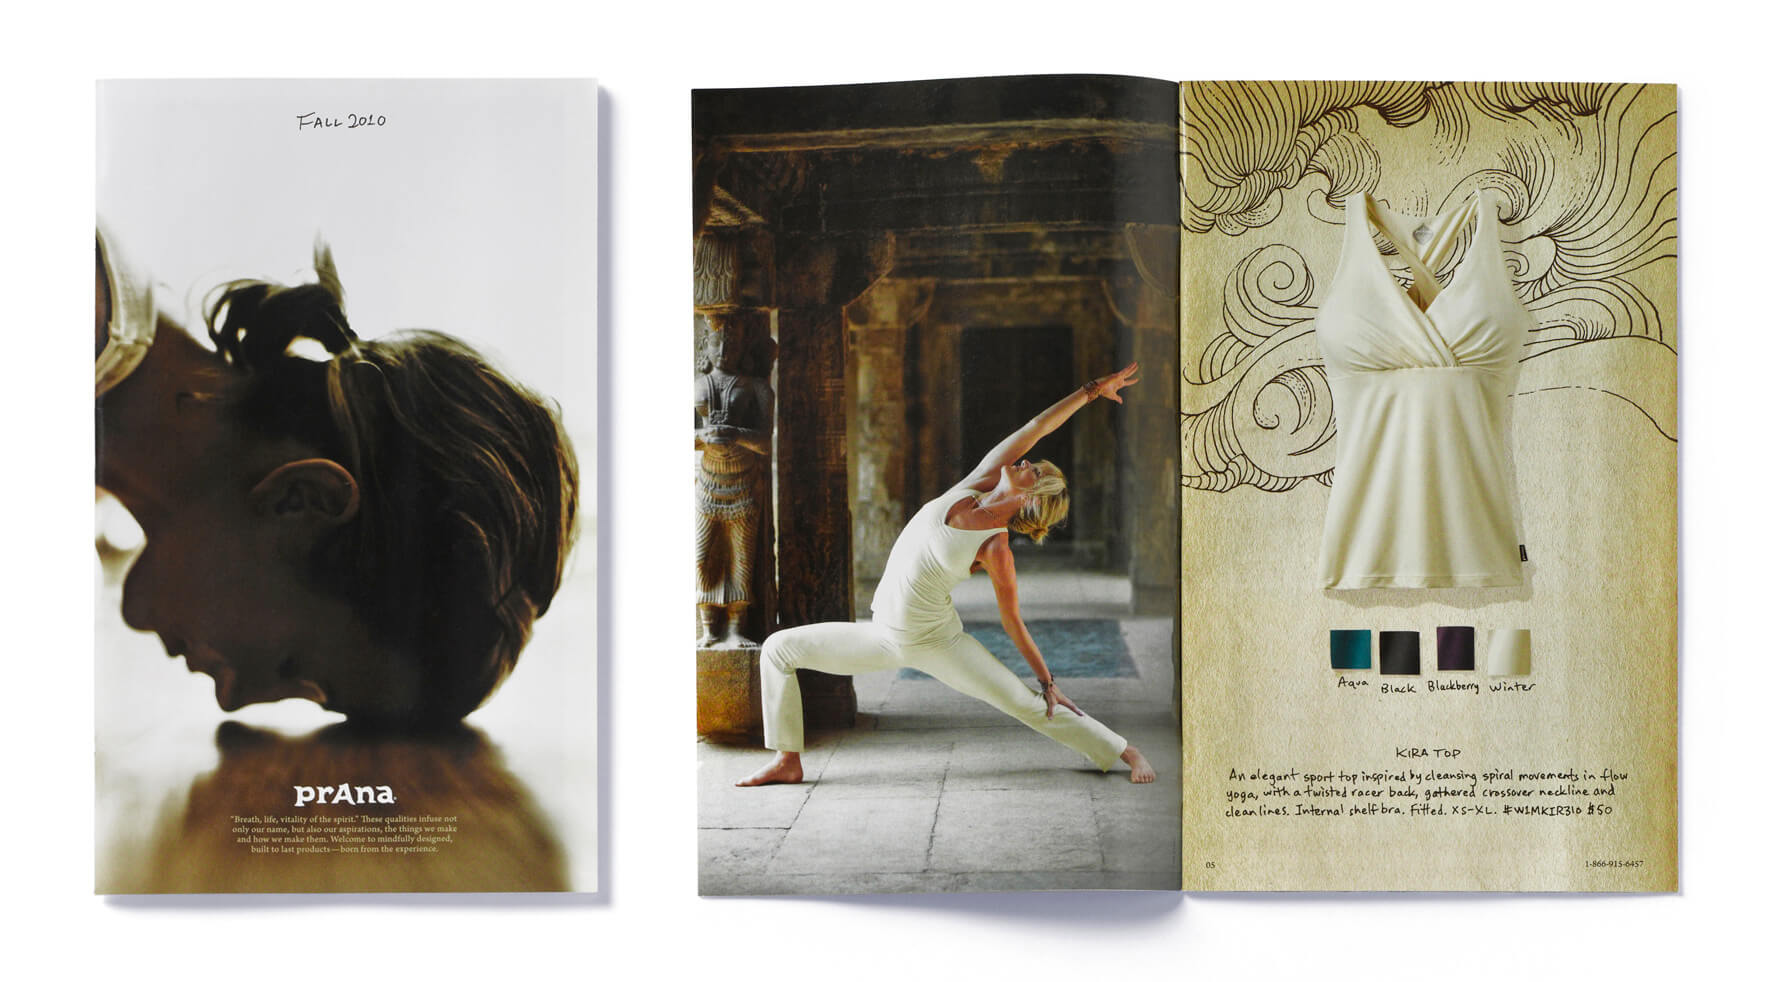 prAna expands its vision with a new catalog - Elixir Design